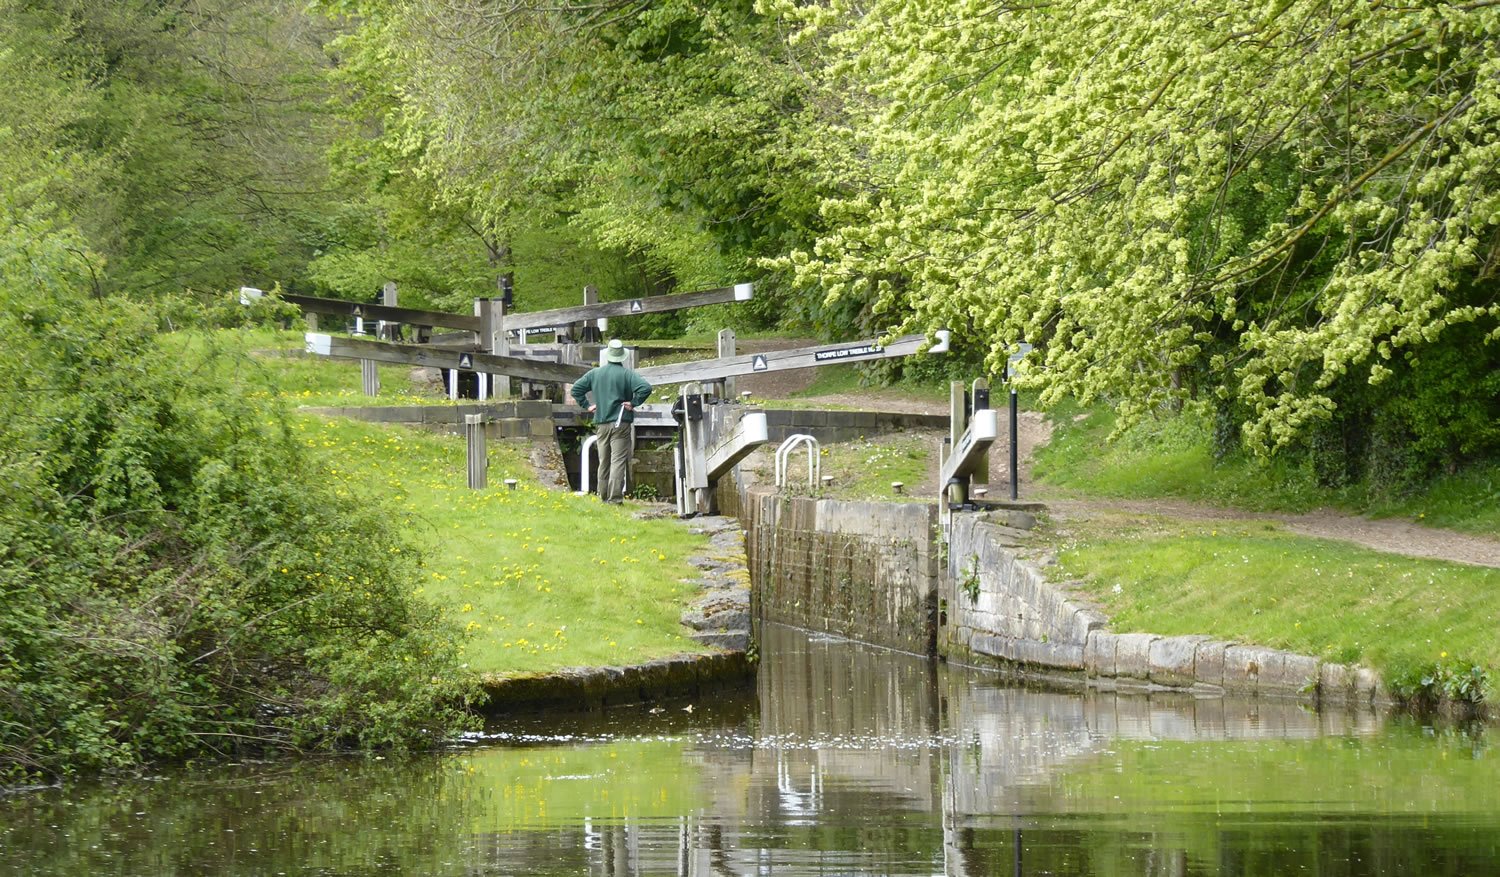 Image name giants staircase locks chesterfield canal south yorkshire the 20 image from the post Walk: The Giant's Staircase in Yorkshire.com.